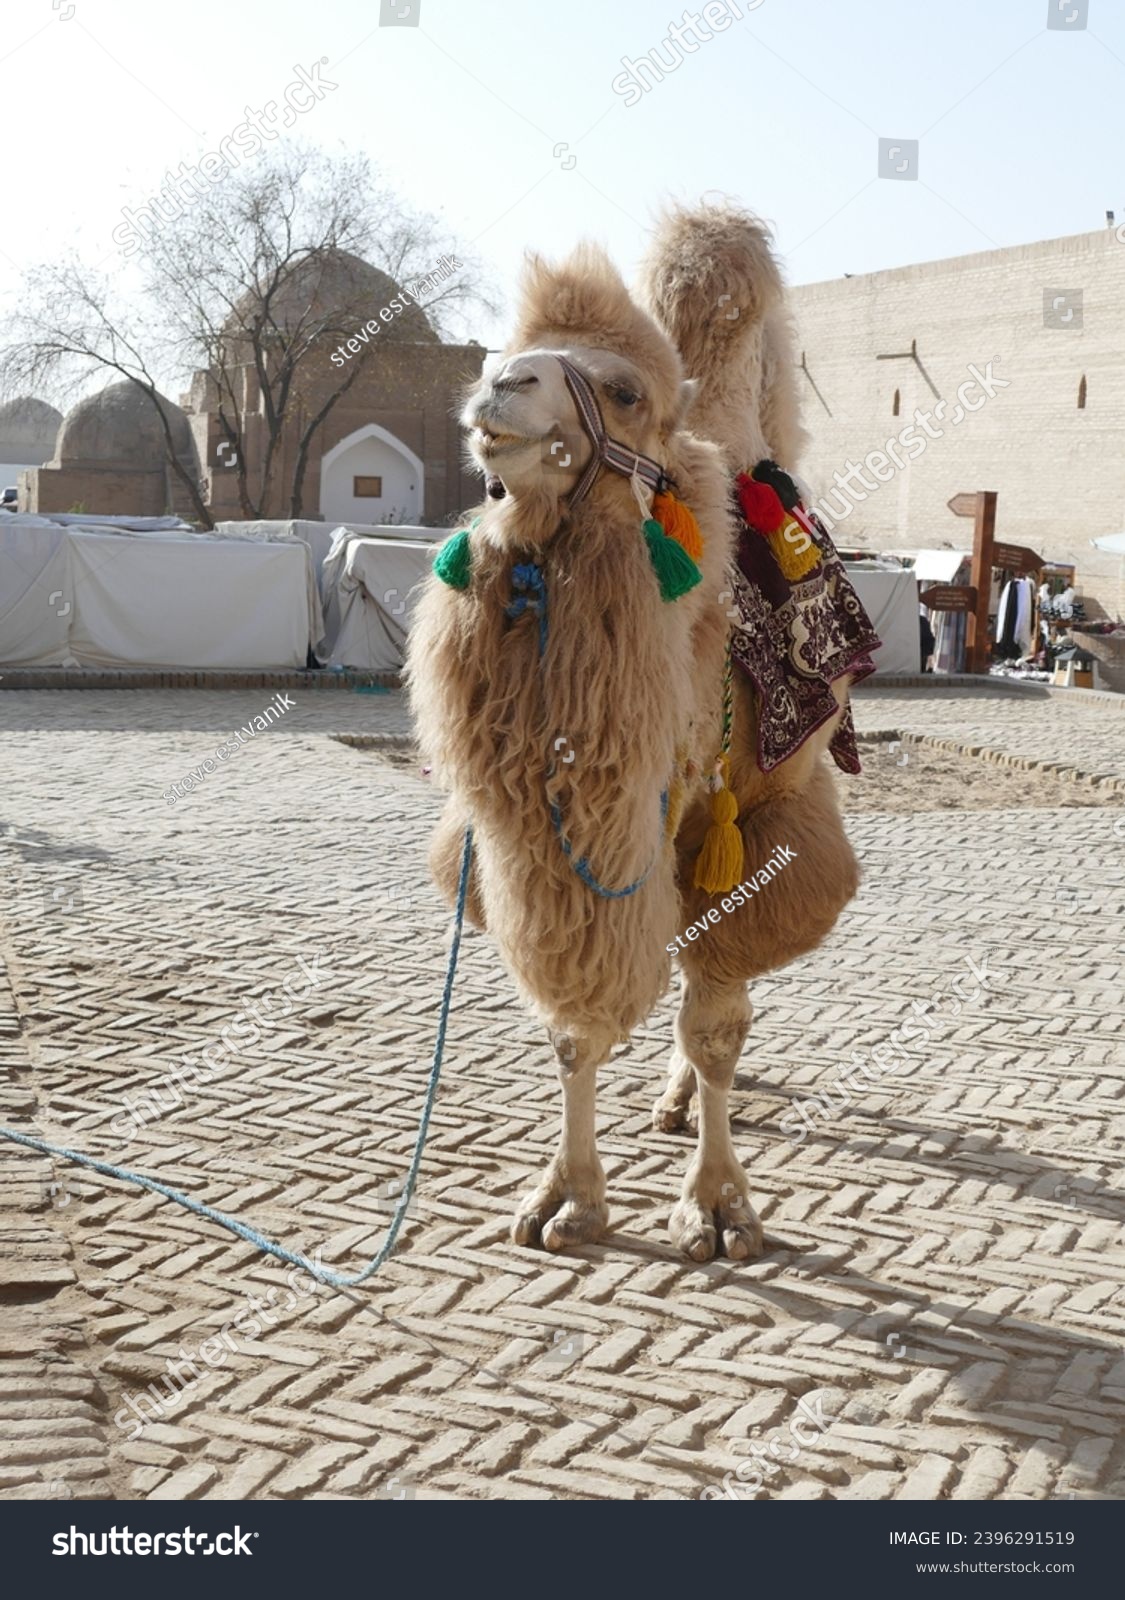 Bactrian Camel (Camelus bactrianus) poses in a small square in Khiva, Uzbekistan #2396291519